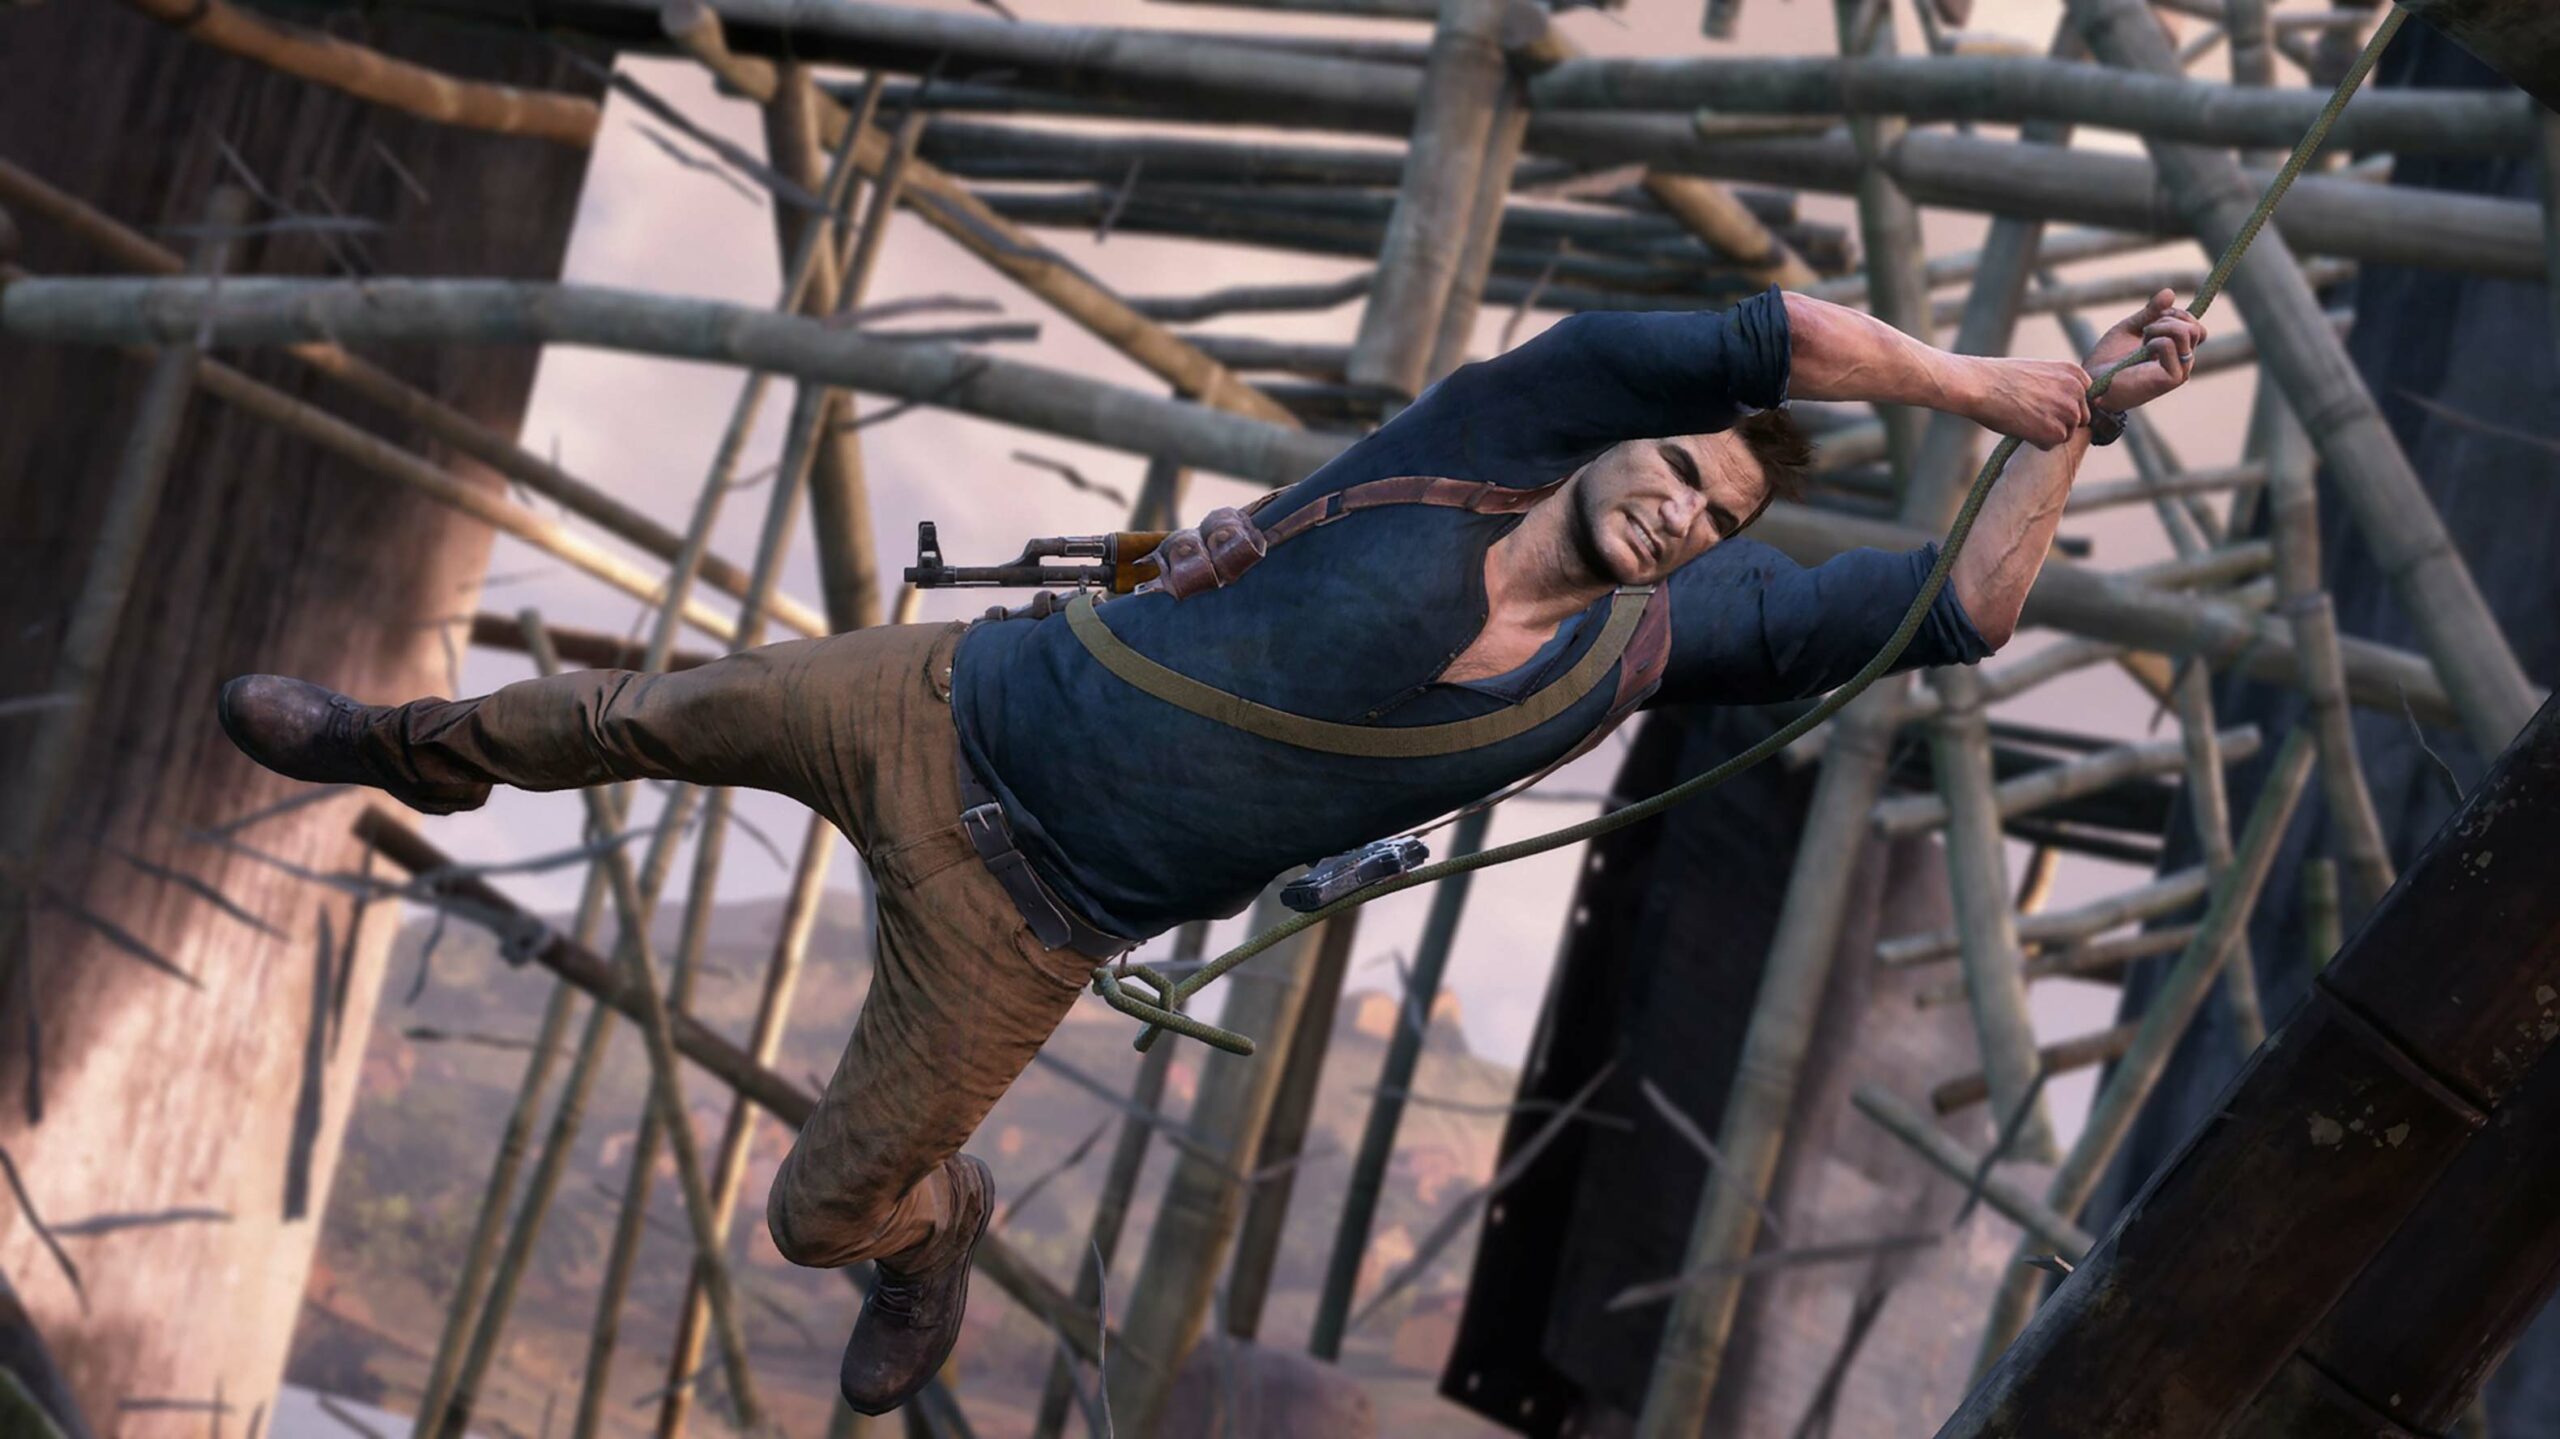 uncharted 4 pc release date